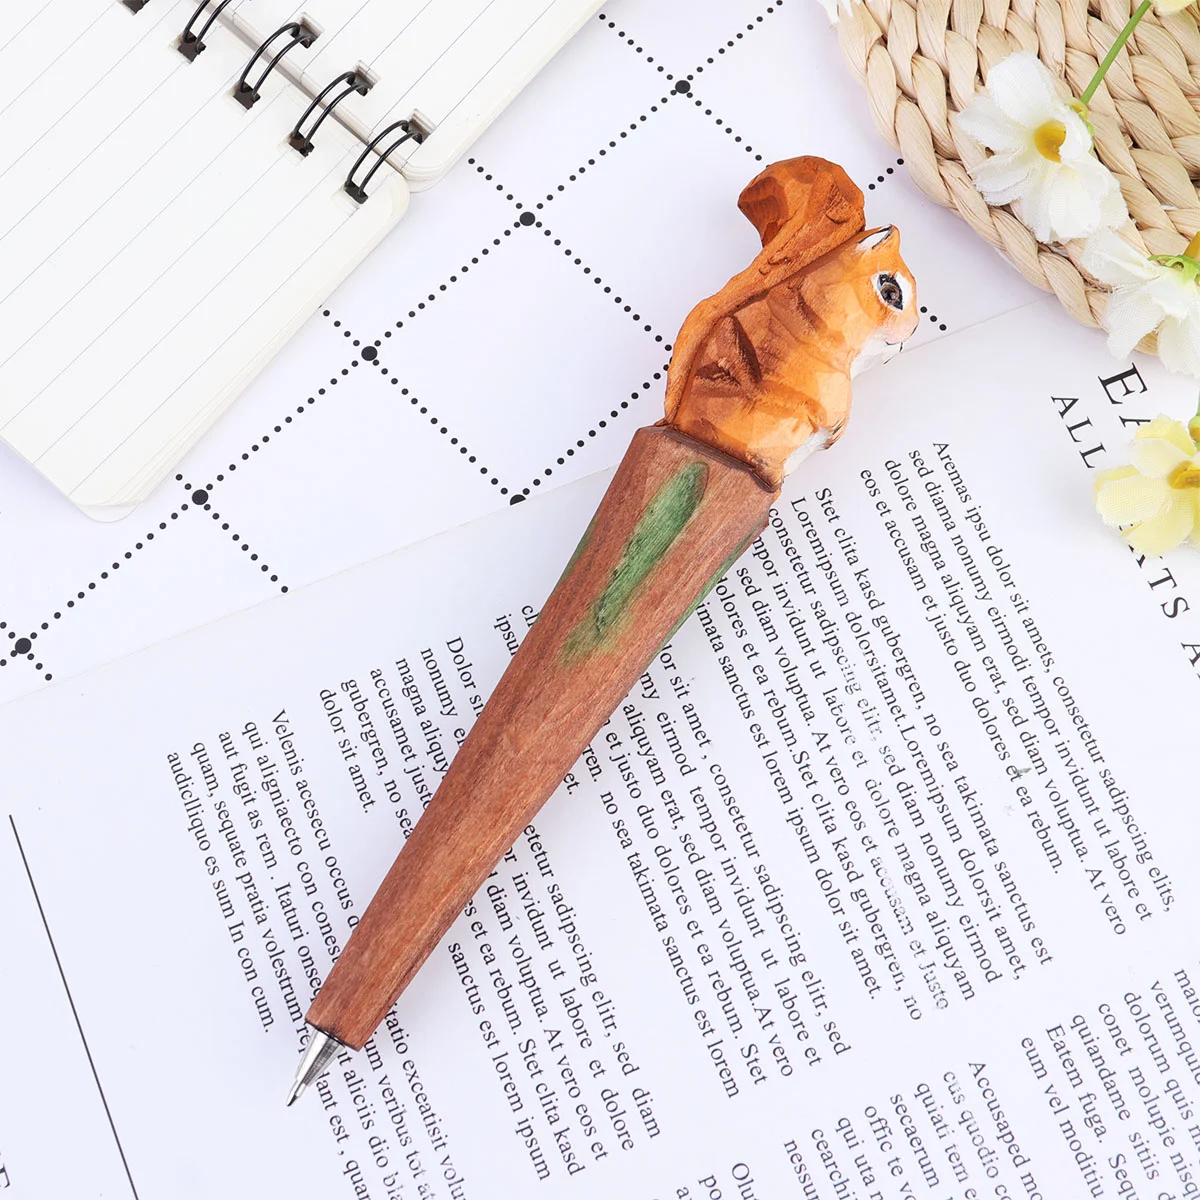 Pure Handmade Wood Carving Animal Pen Creative Wood Carving Squirrel Ballpoint Pen Replaceable Refill Gel Pen for Students for bose sennheiser creative live2 e30 e55 700 qc25 y50 pcx550 dt240pro replaceable headset 2 5mm balance silver plated cable